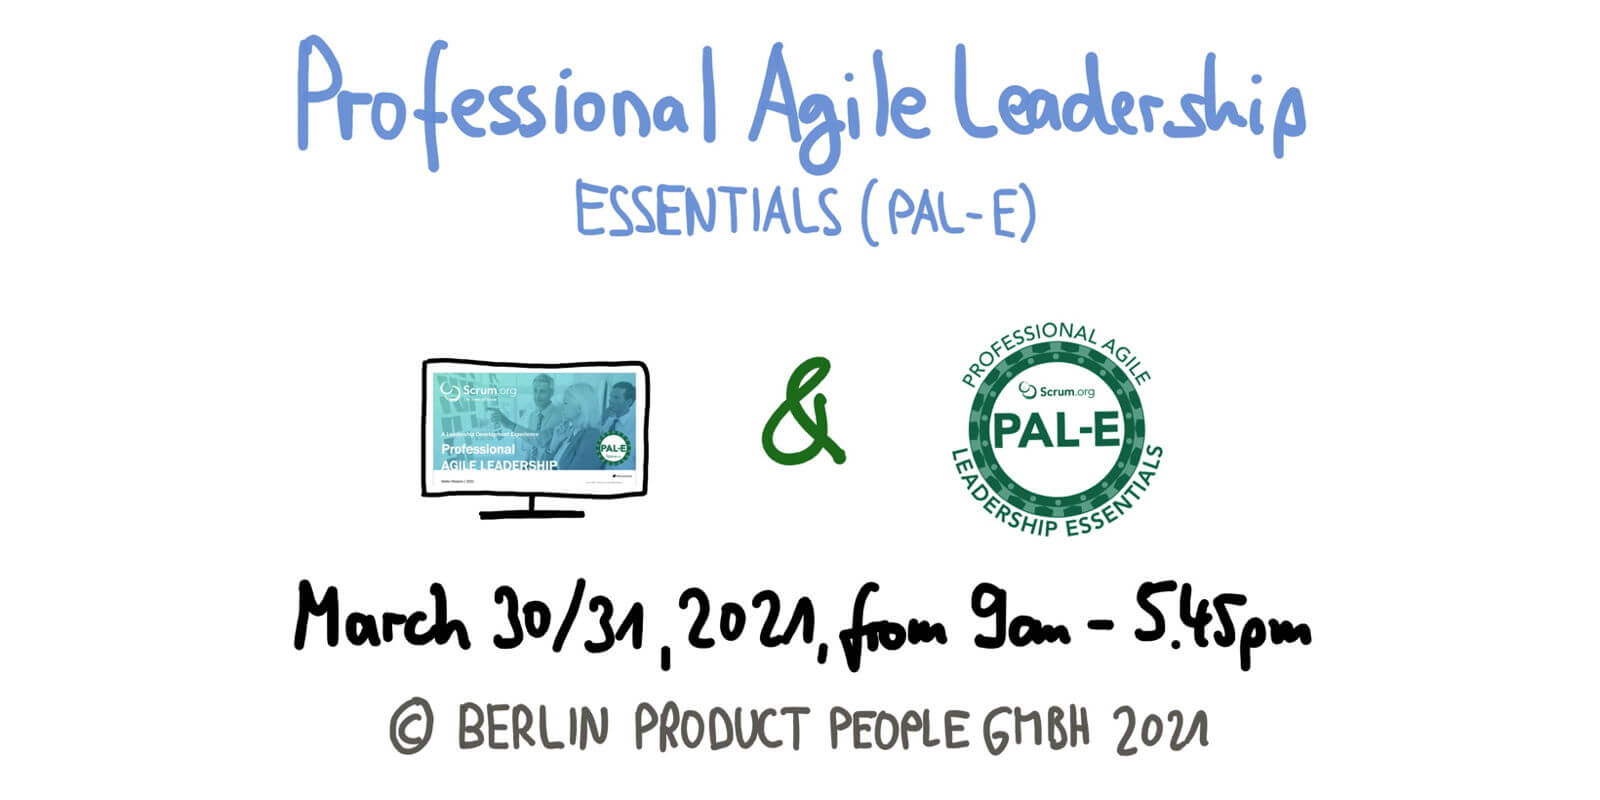 Professional Agile Leadership Essentials Training March 2021 — Berlin Product People GmbH